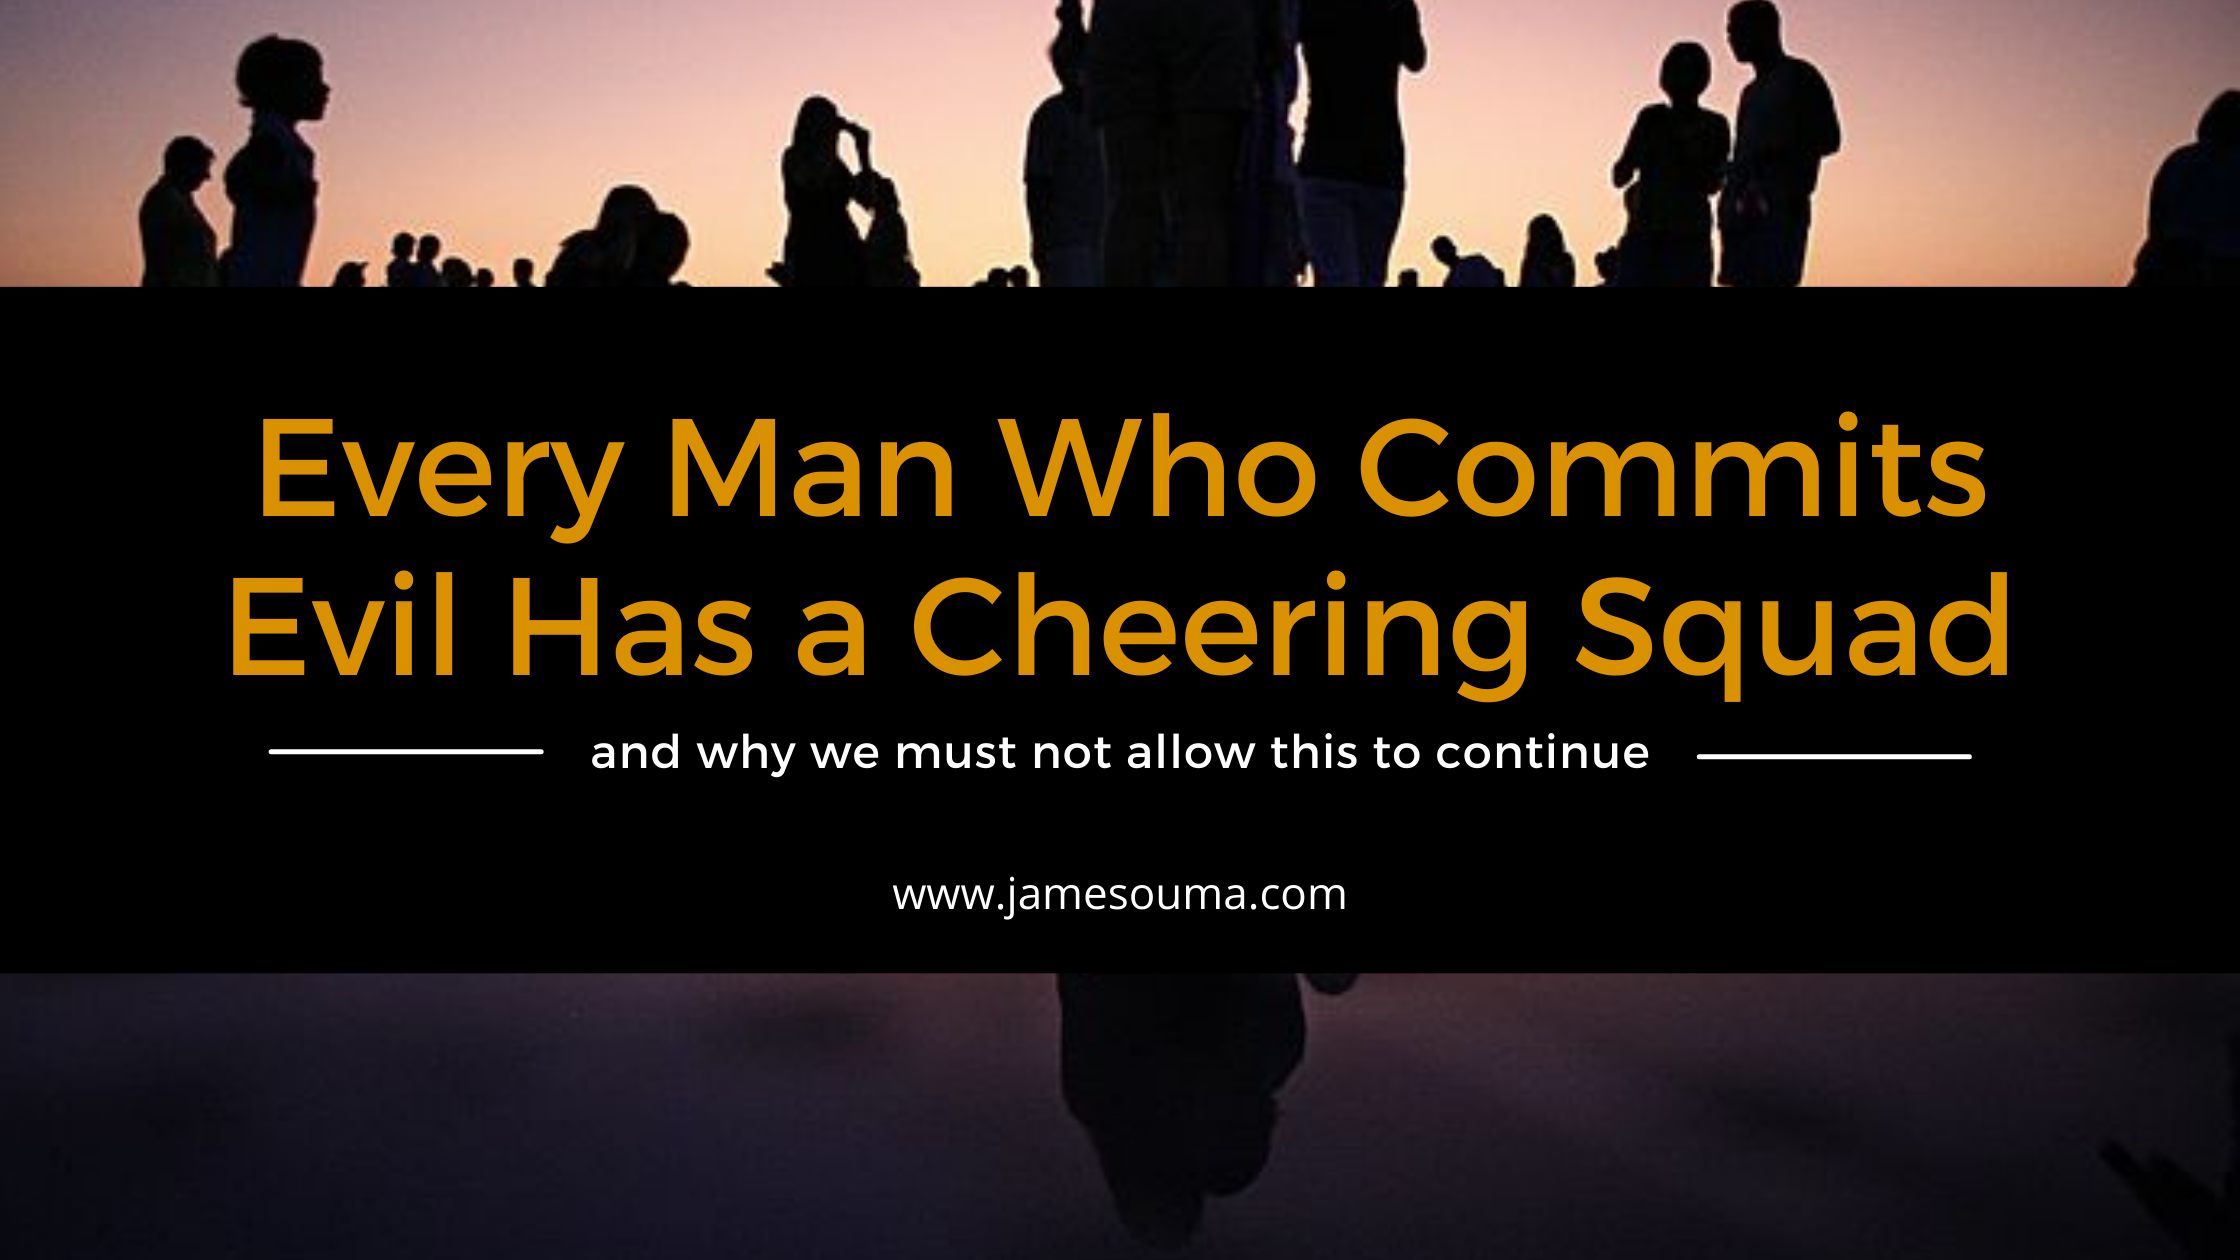 Every Man Who Commits Evil Has a Cheering Squad